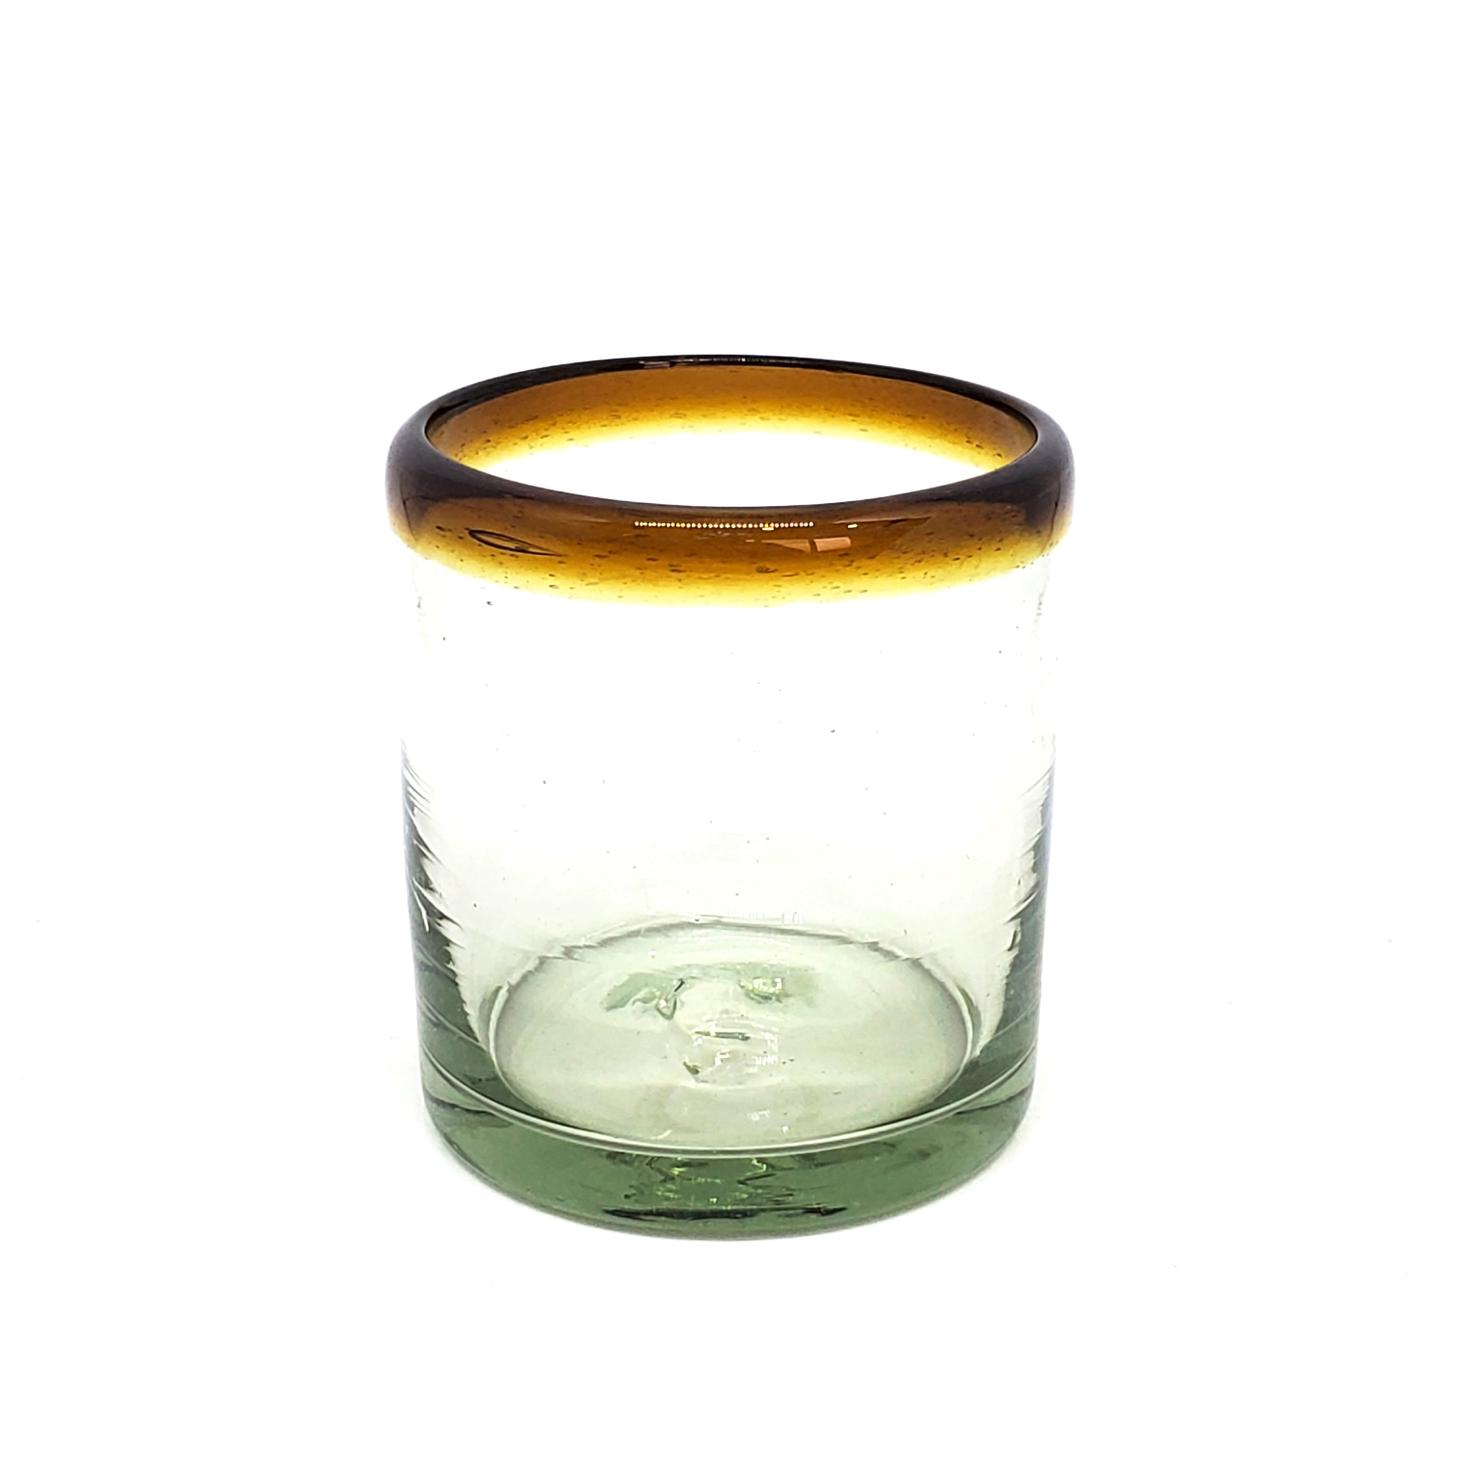 Sale Items / Amber Rim 8 oz DOF Rock Glasses (set of 6) / These Double Old Fashioned glasses deliver a classic touch to your favorite drink on the rocks.